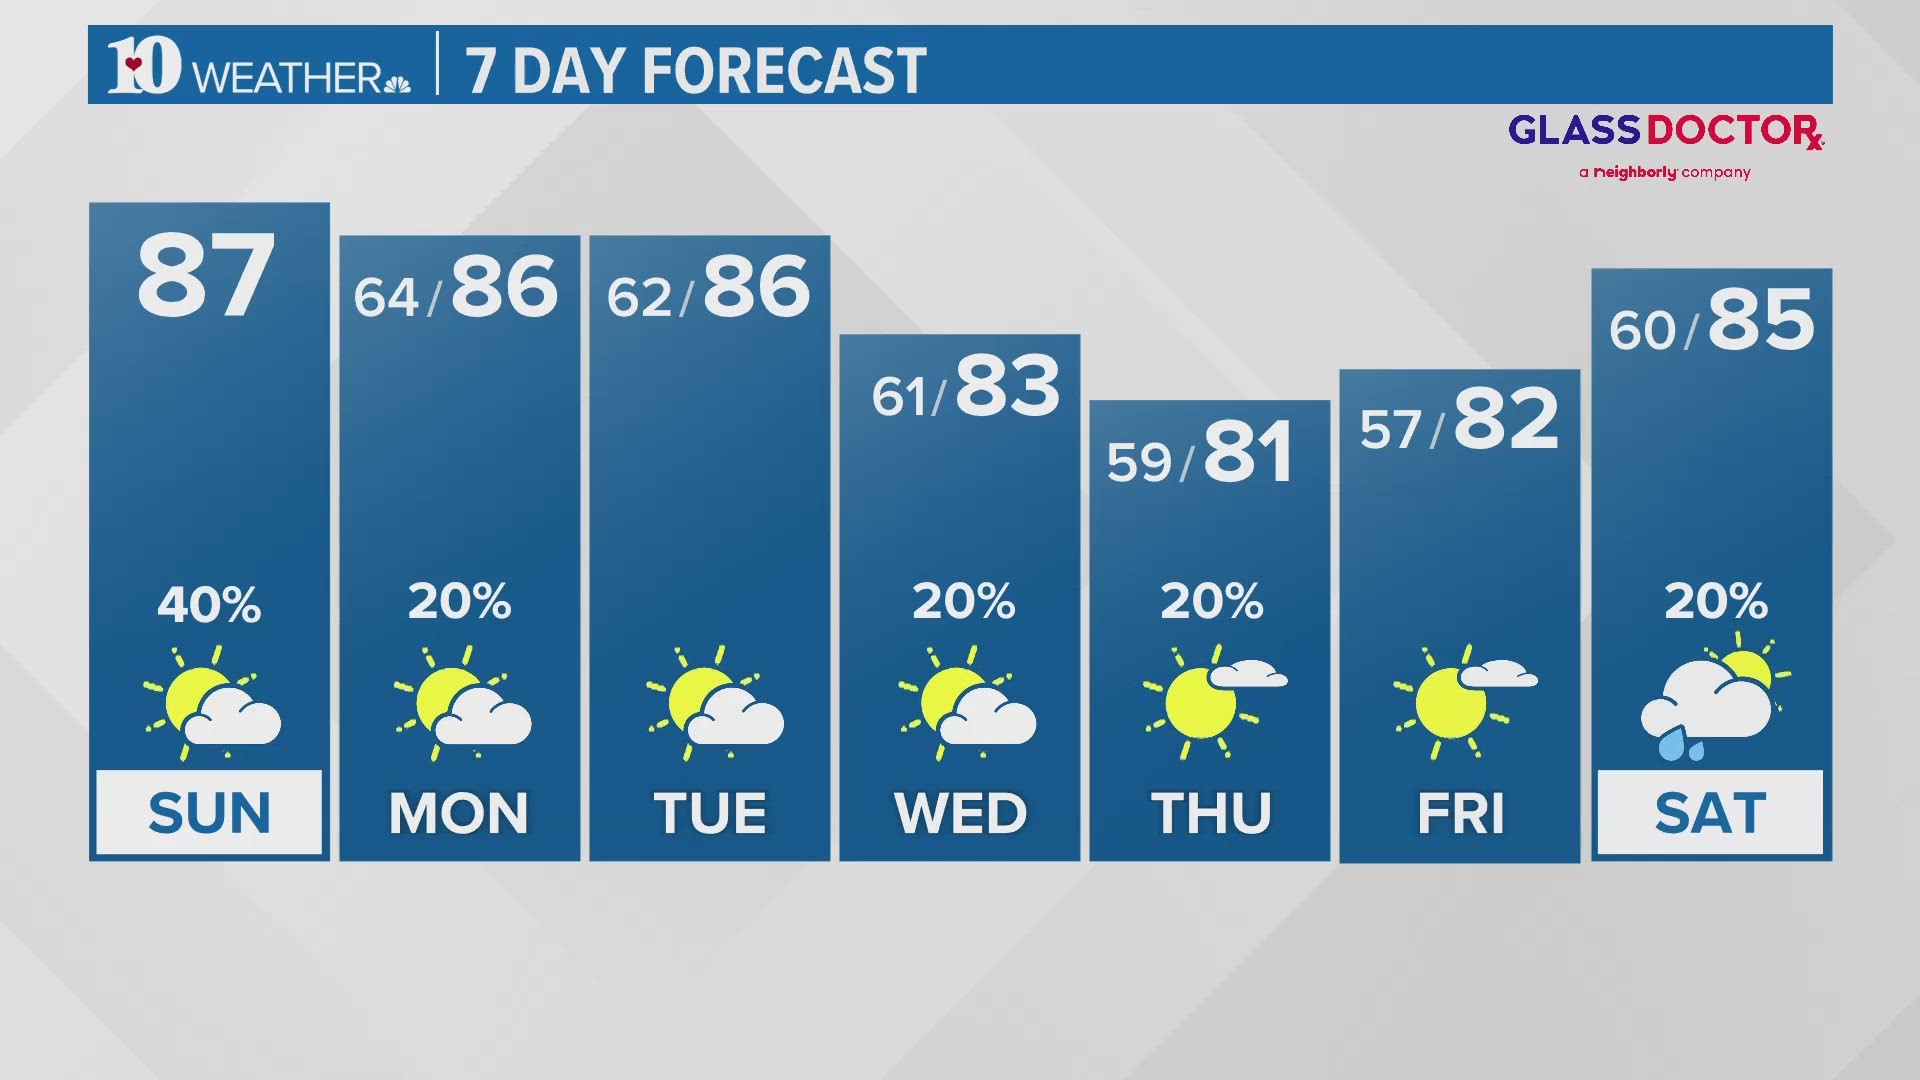 9a Forecast: hot day with chance for strong isolated storms in the south